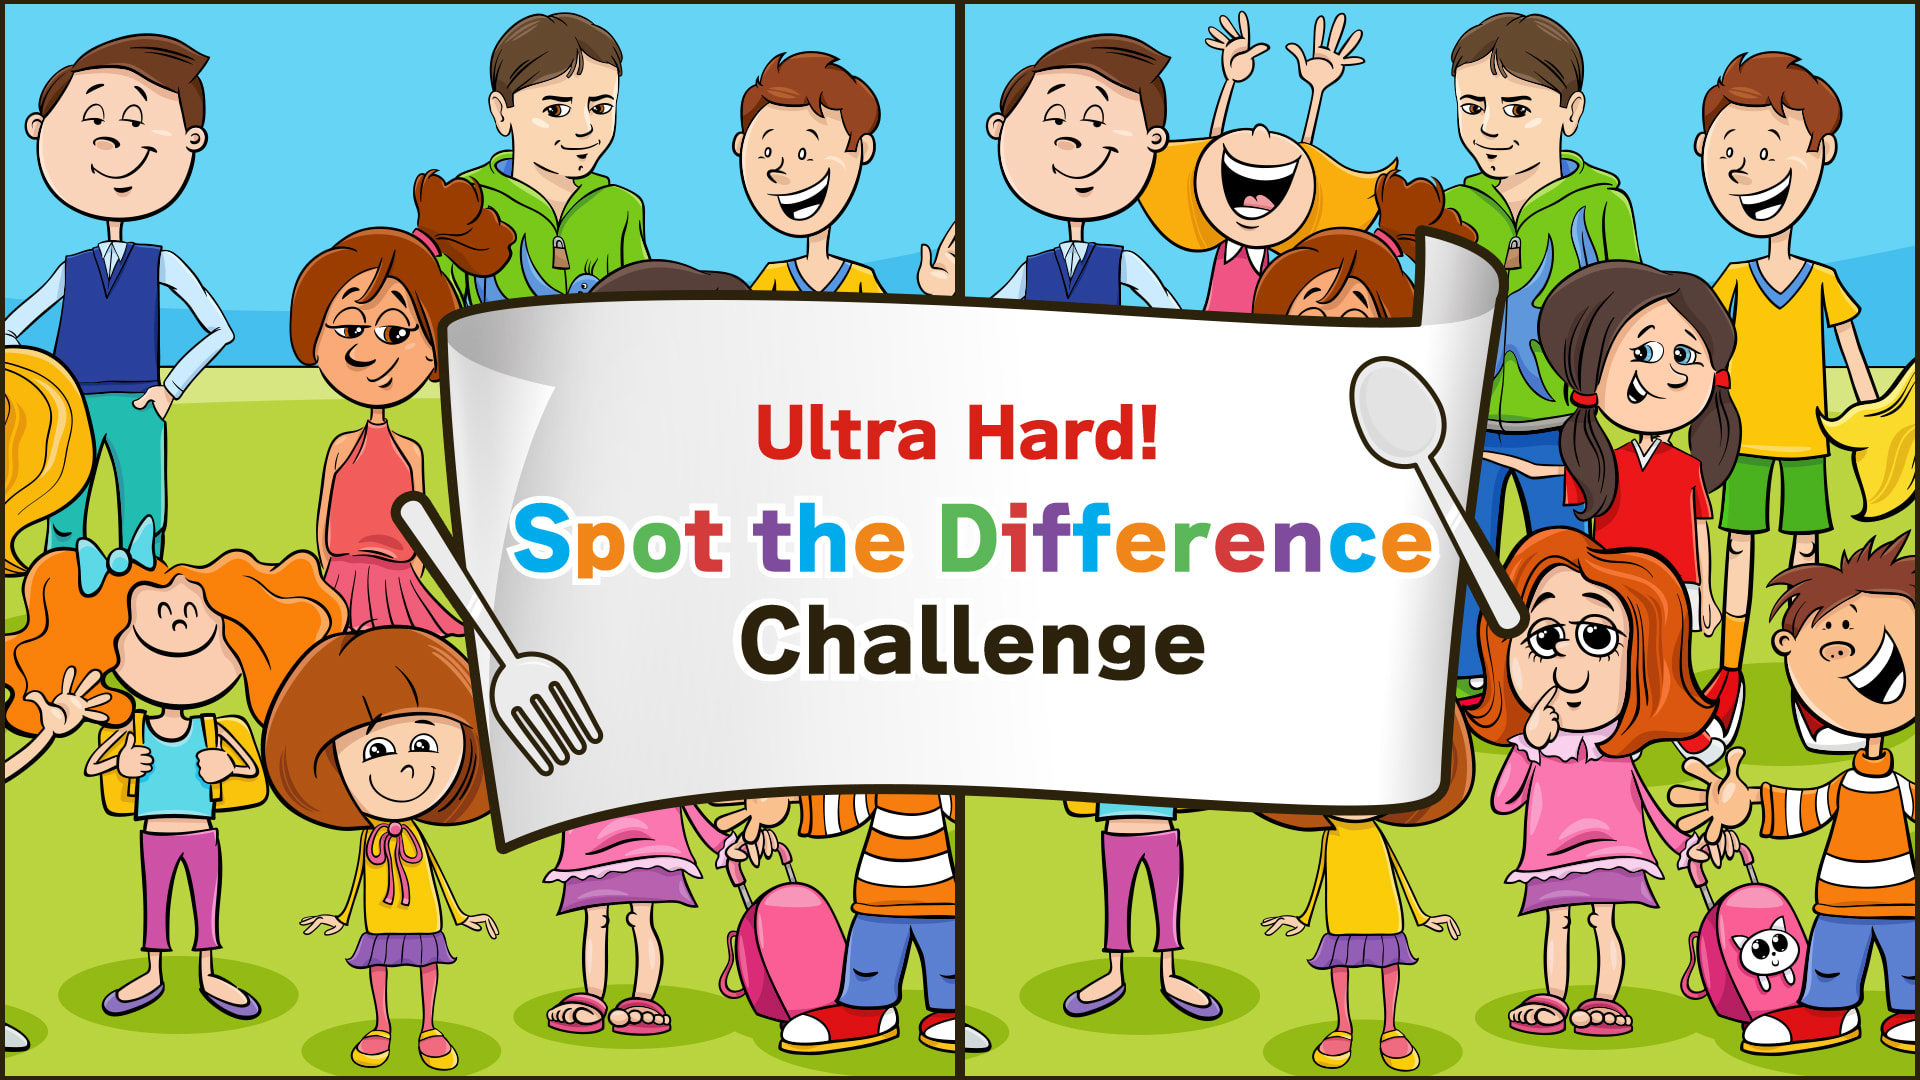 Ultra Hard! Spot the Difference Challenge